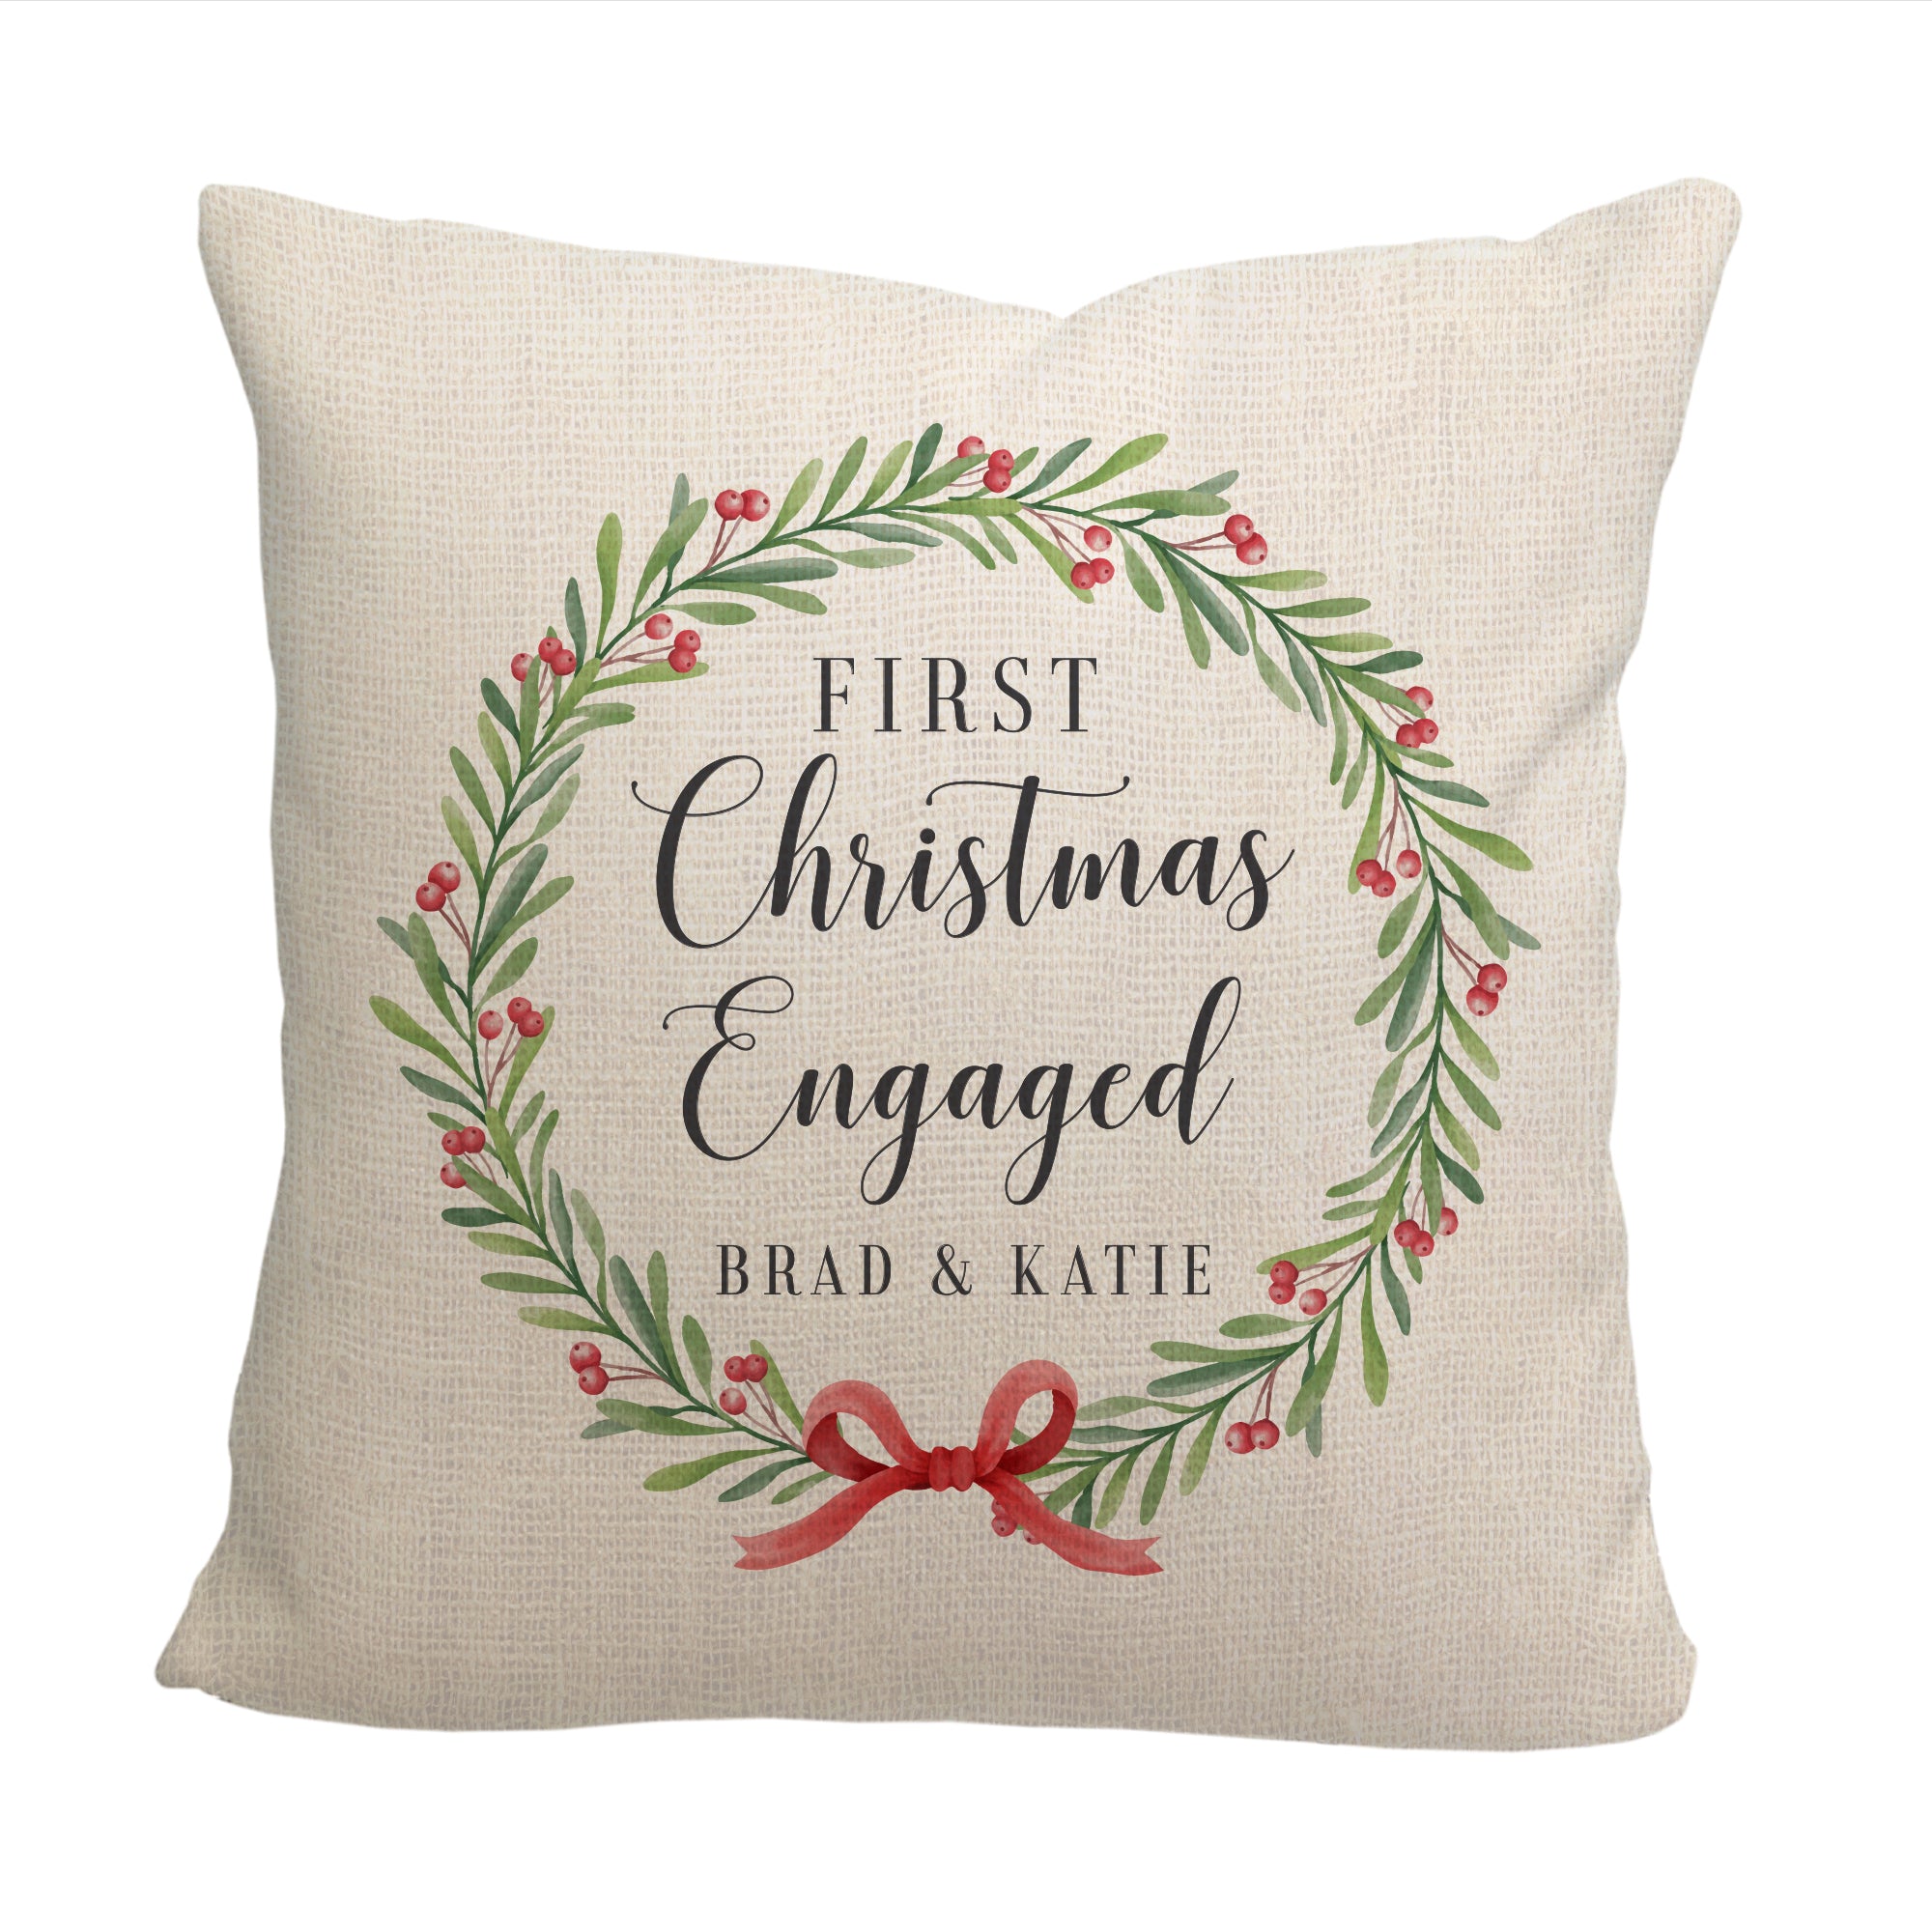 First Christmas Engaged Pillow - Cover Only OR Cover with Inserts